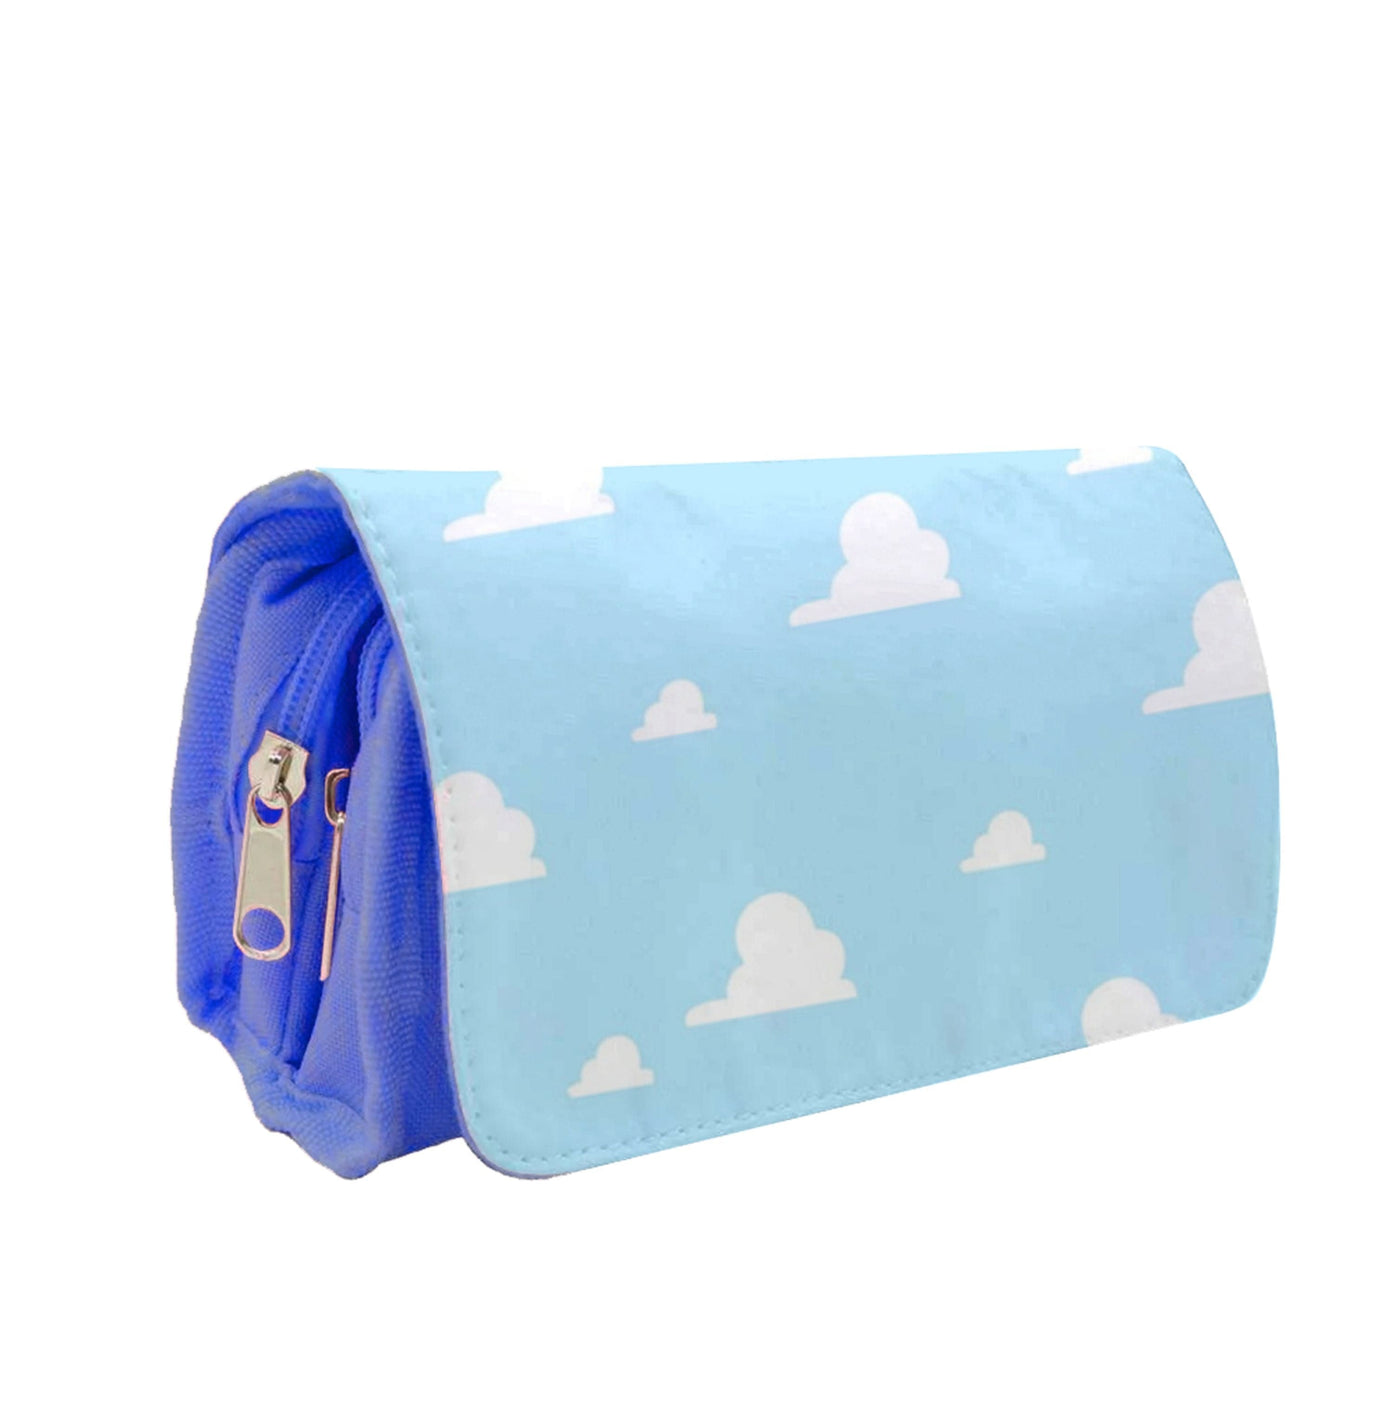 Andy's Bedroom Wallpaper - Toy Story Pencil Case